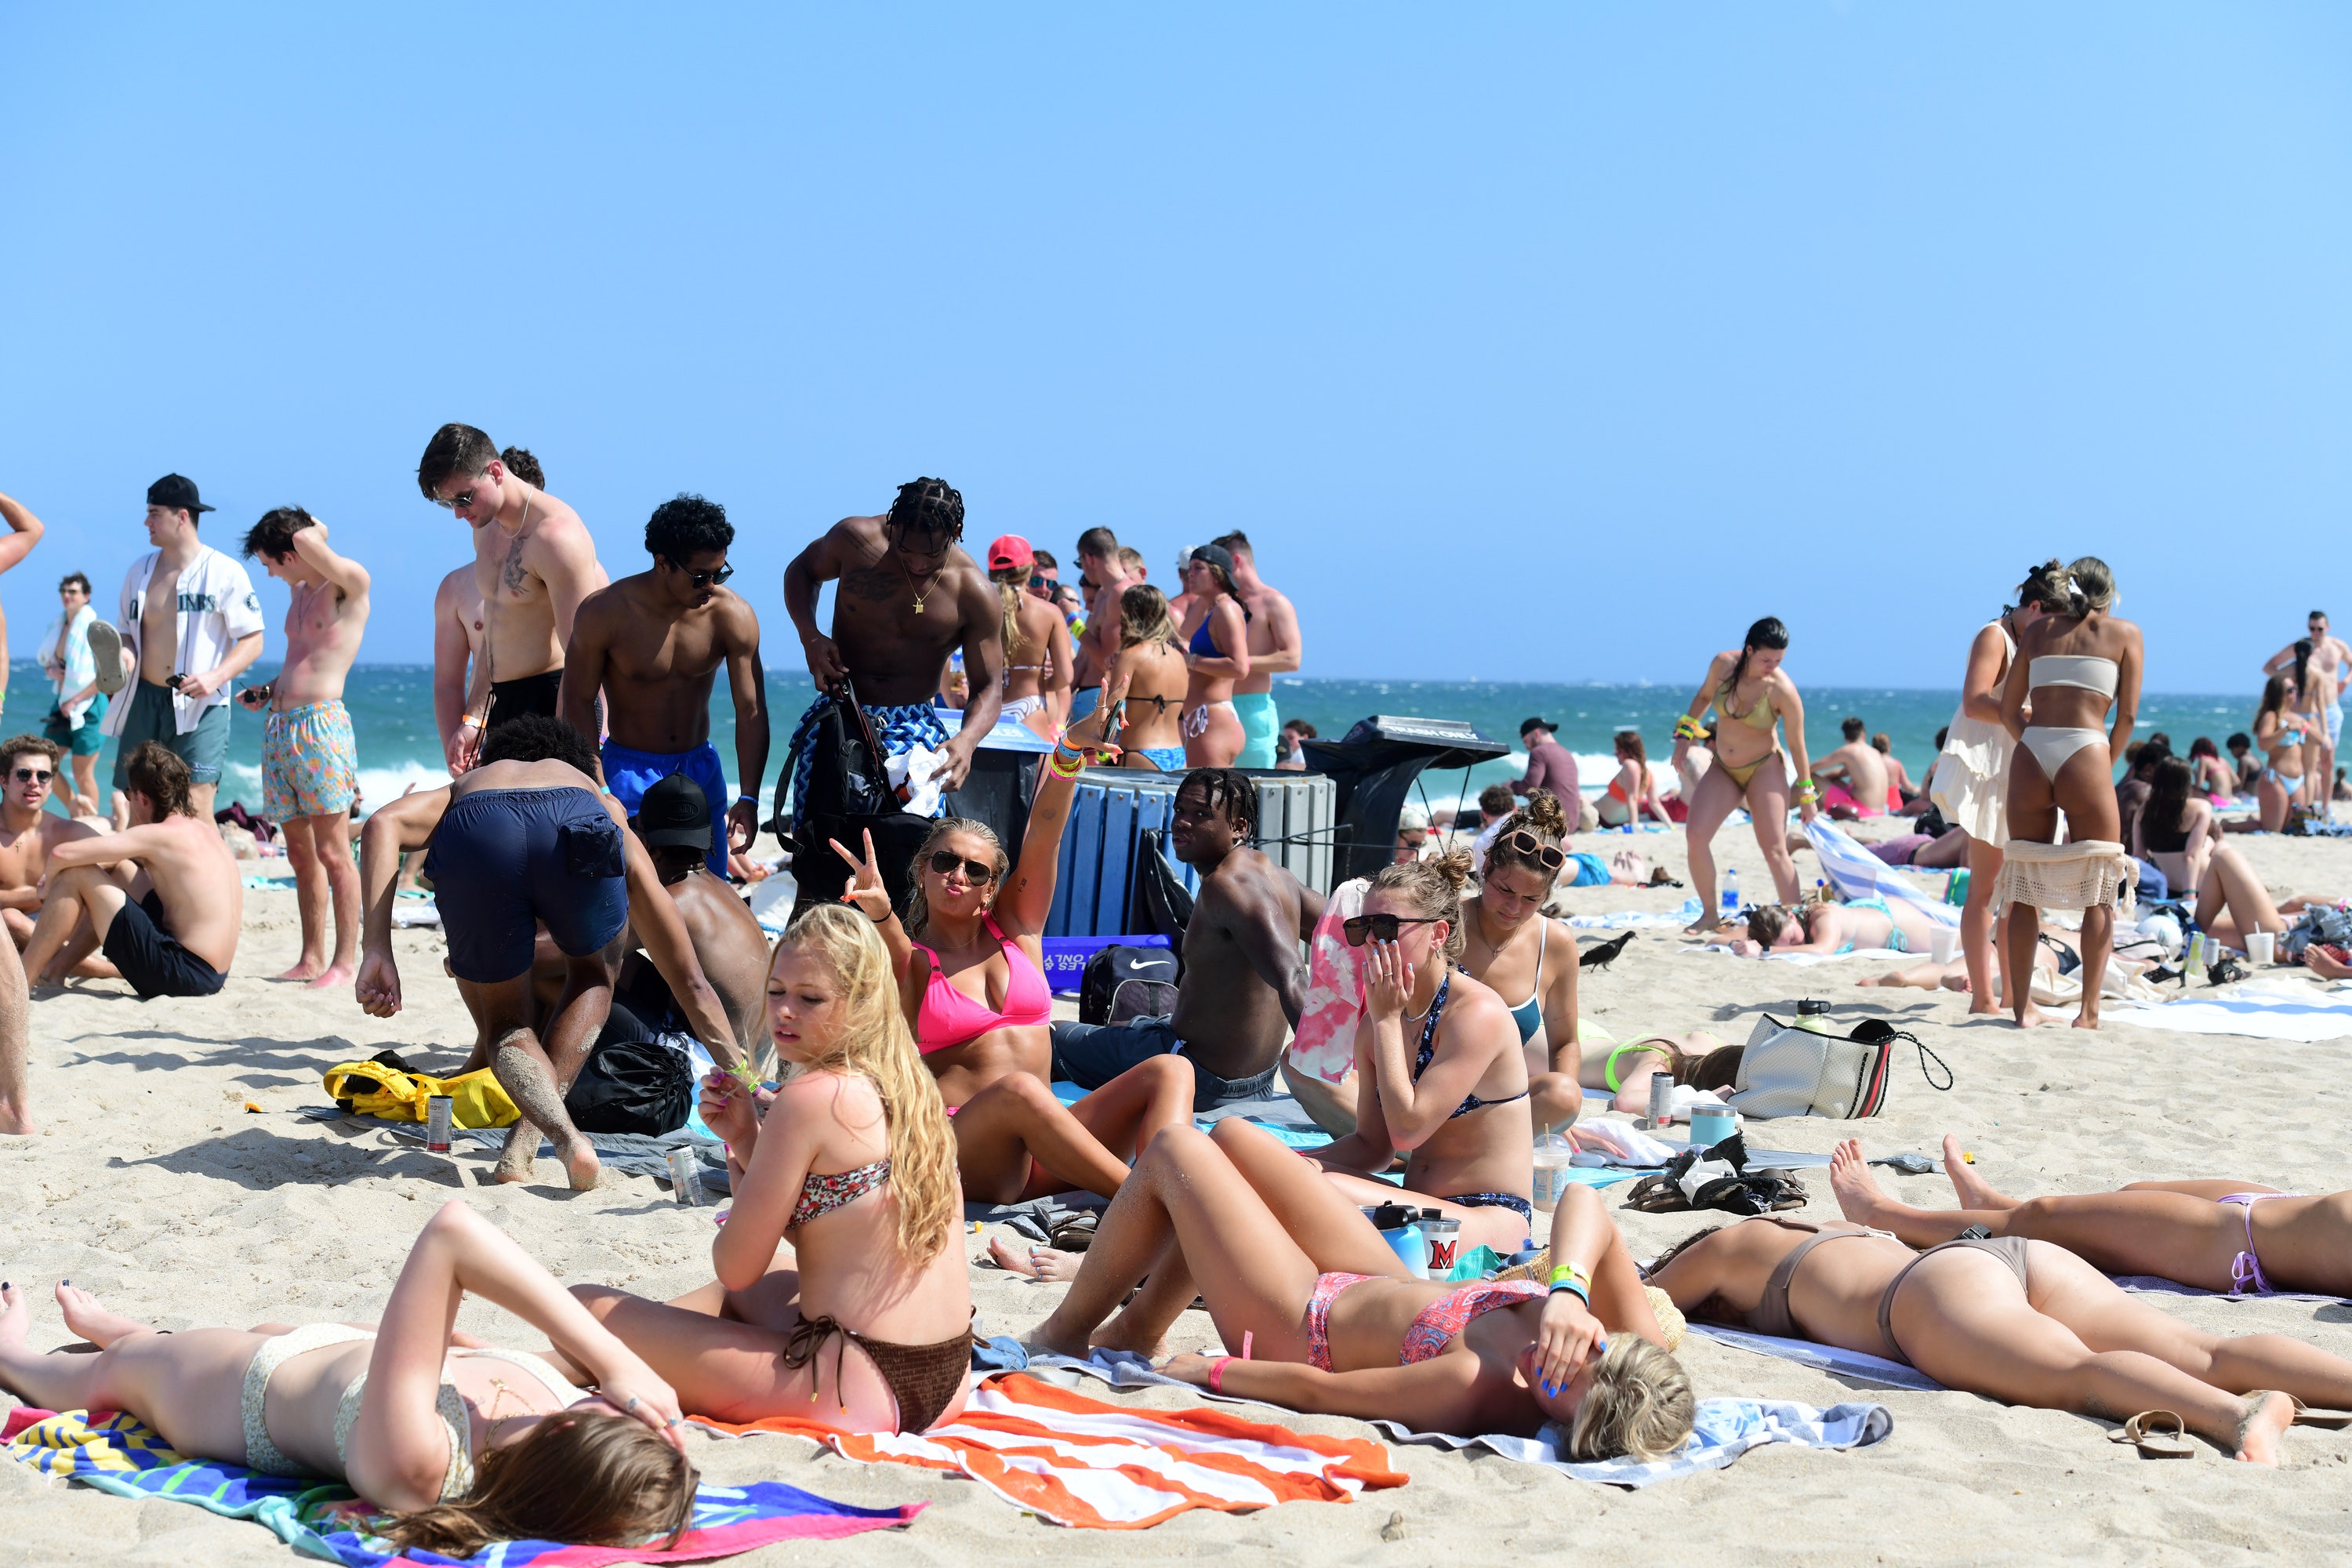 Fort Lauderdale spring breakers having fun in the sun as Miami Beach guests simmer over curfew